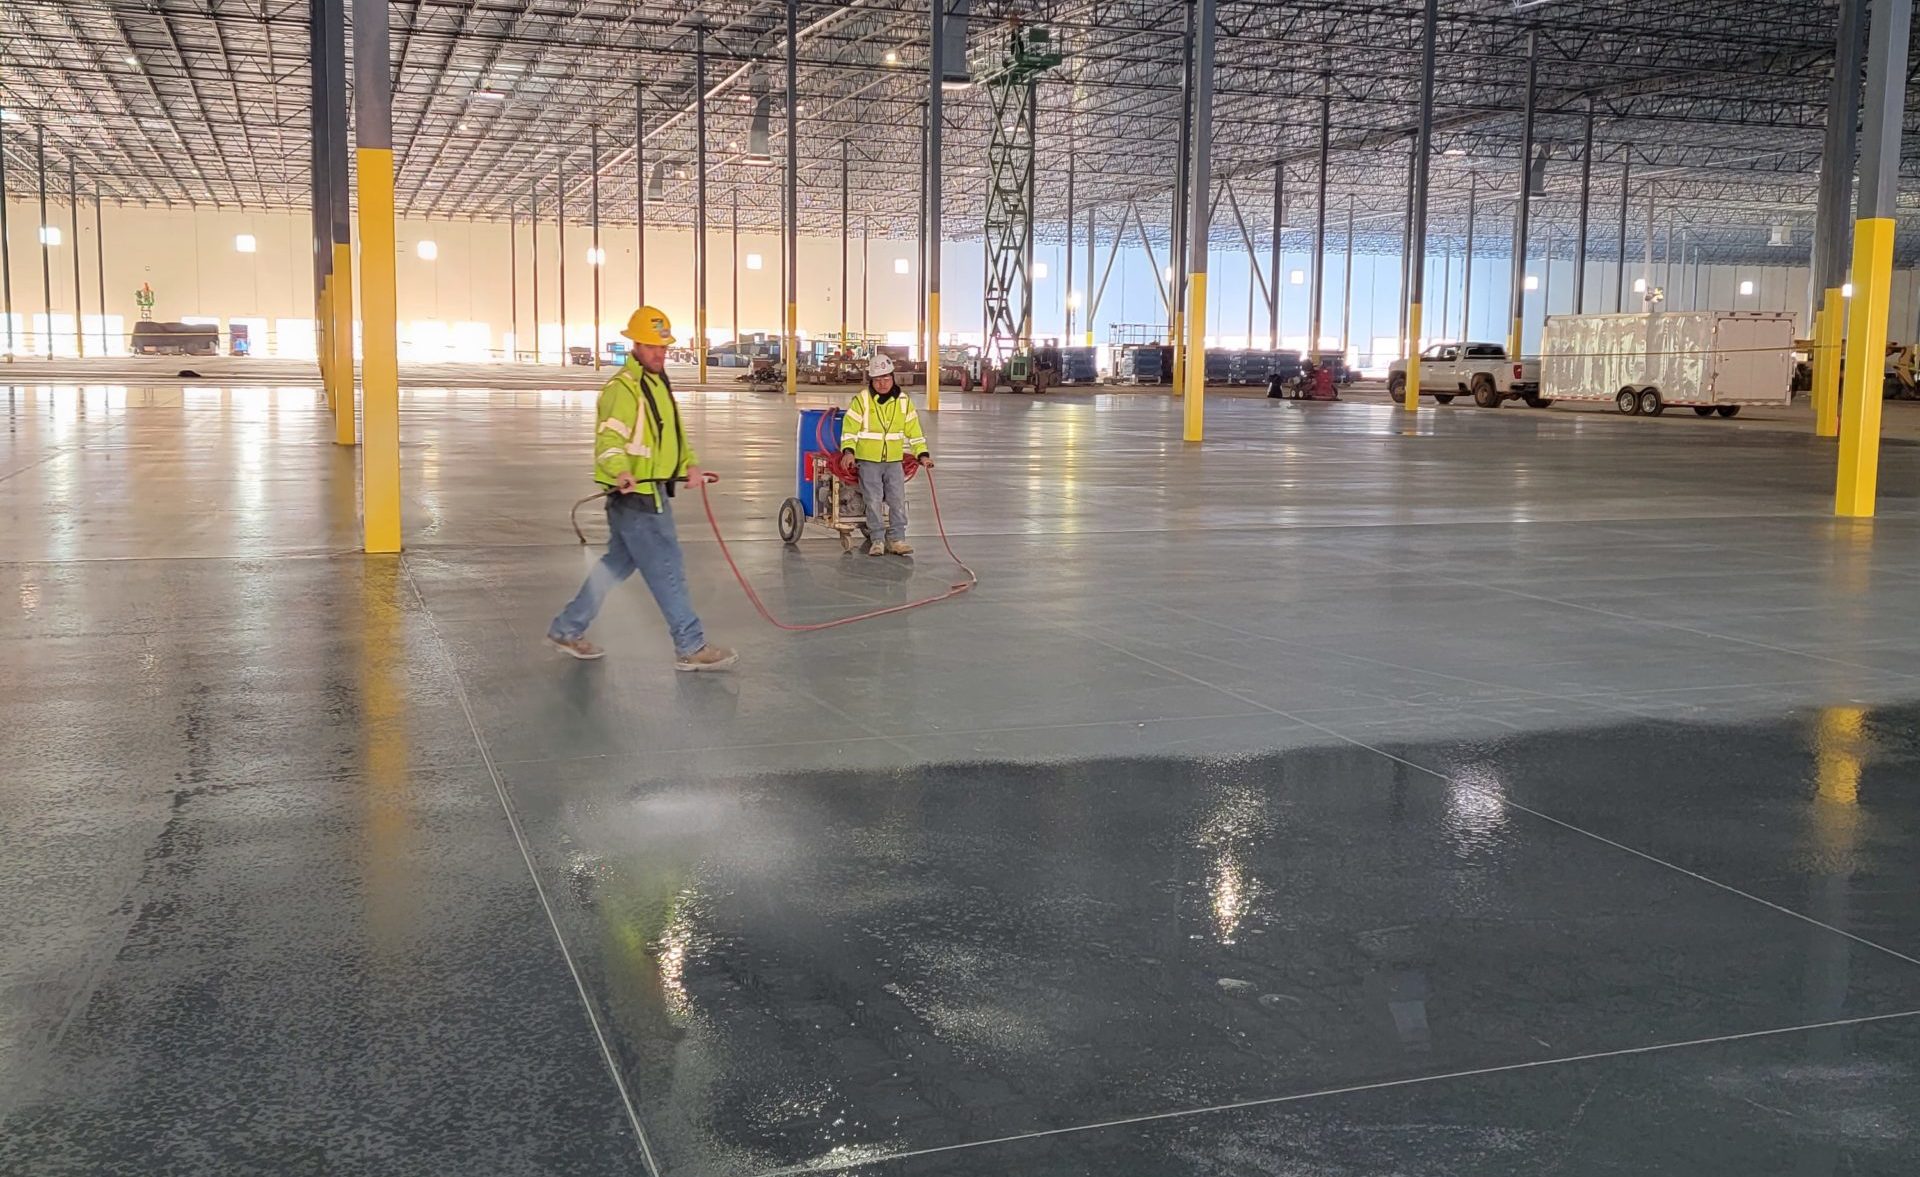 Two men in yellow safety jackets perform floor work in a large industrial shell.